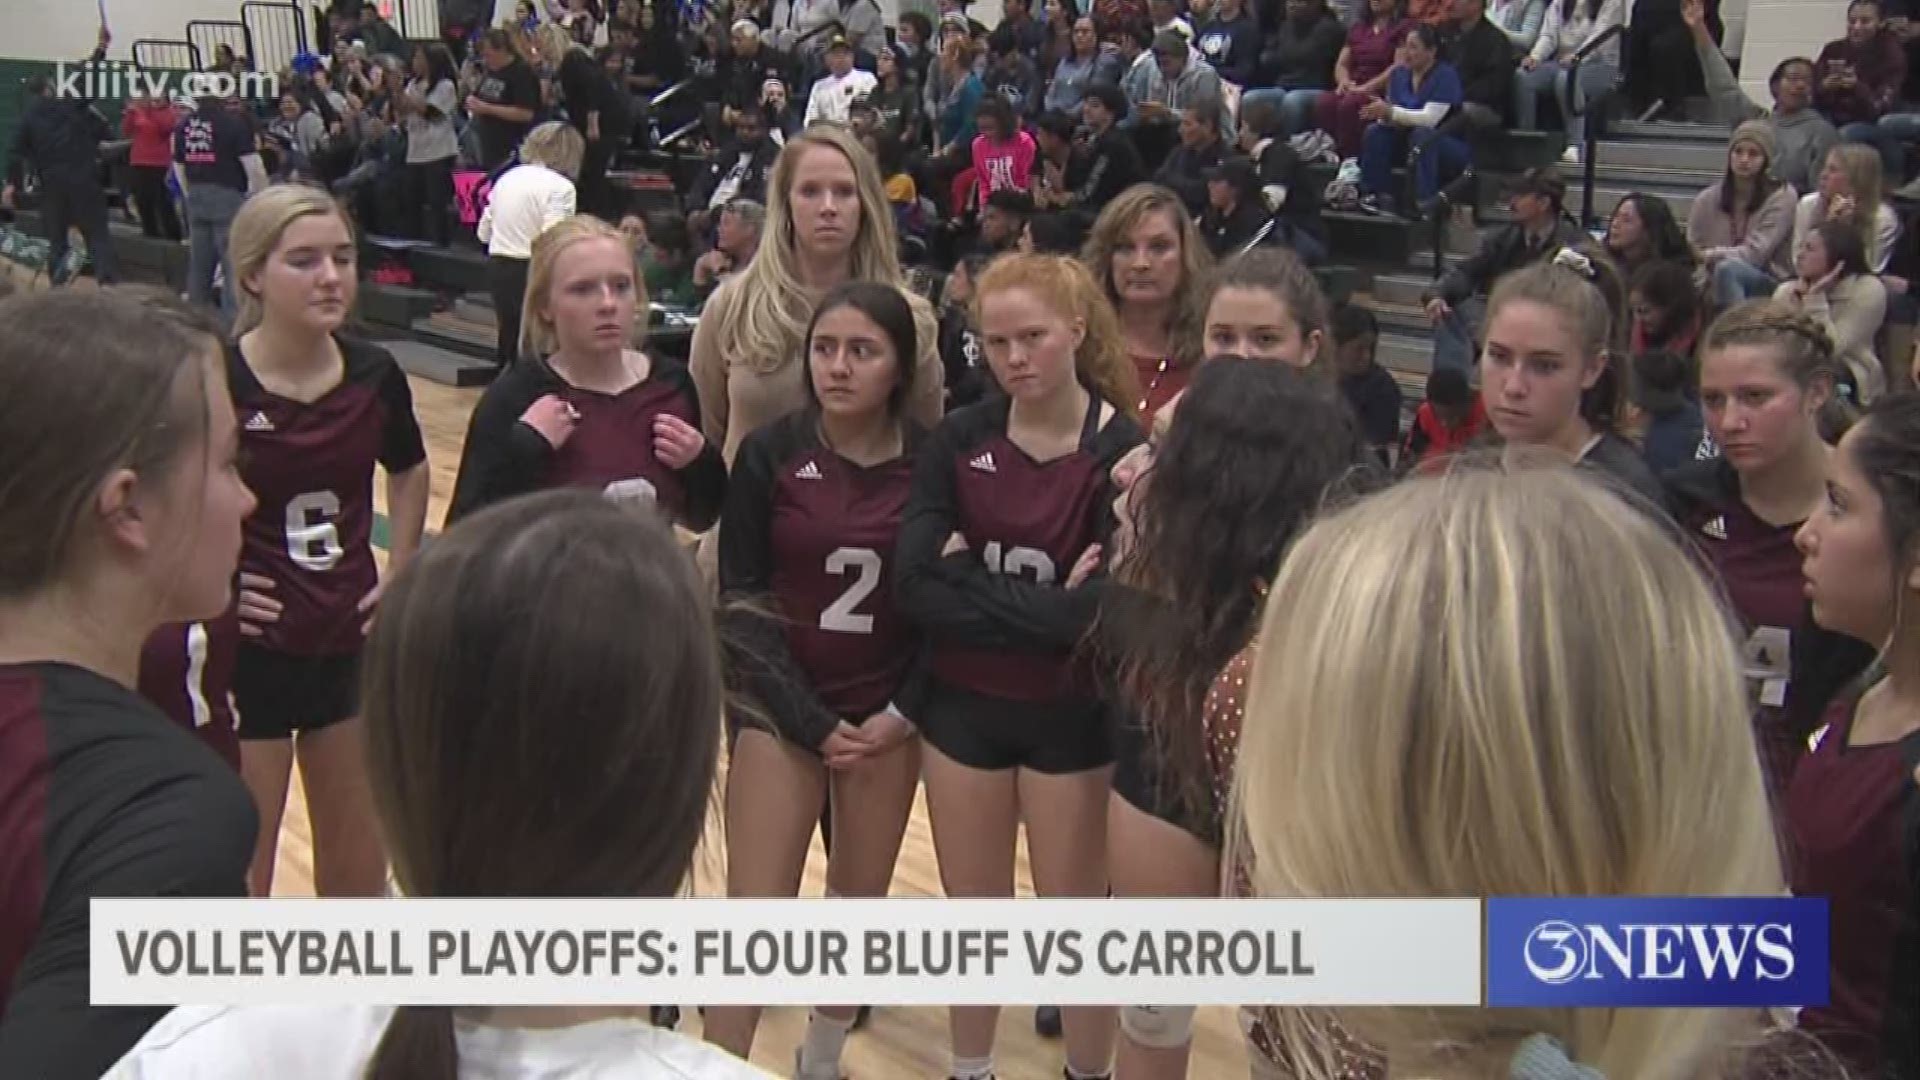 Highlights and Scores from Tuesday night's Volleyball Region Quarterfinals